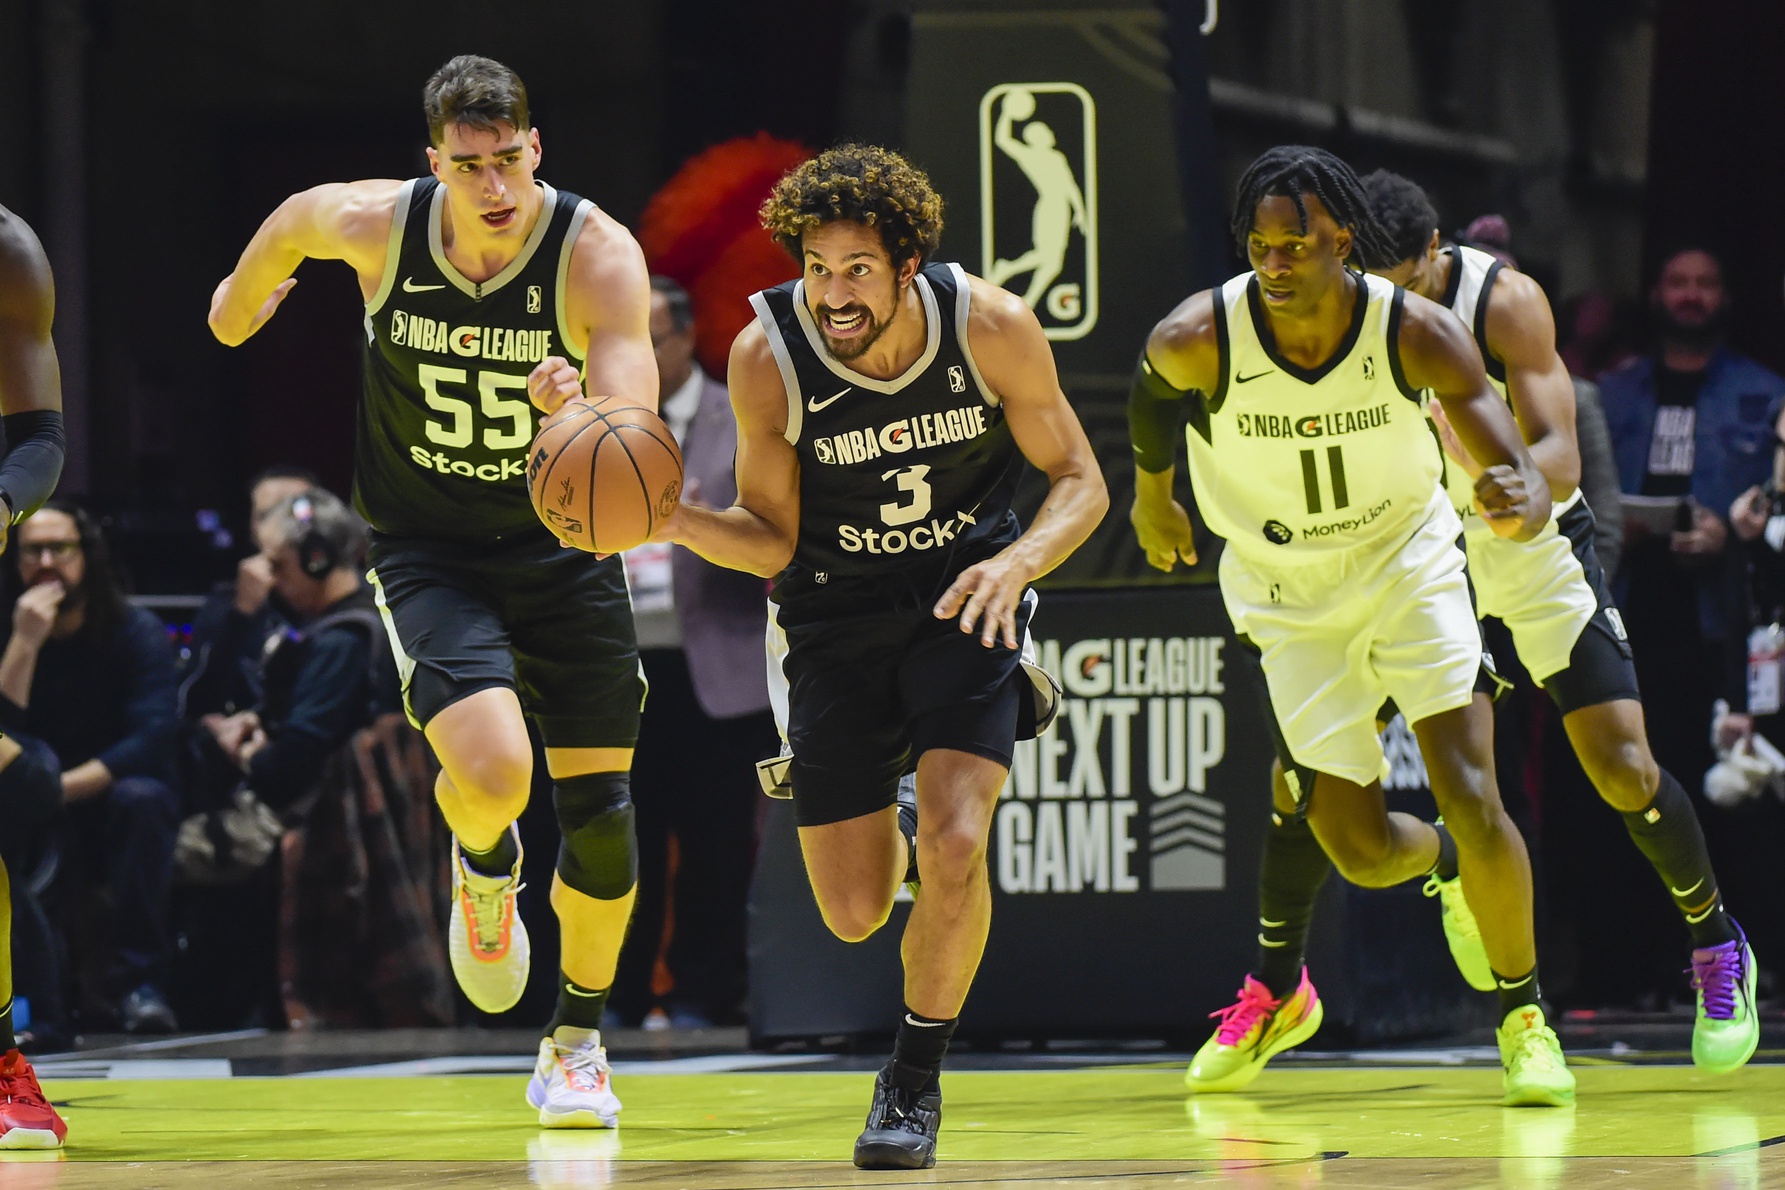 Spurs Re-Sign Dominick Barlow To Two-Way Contract - The NBA G League